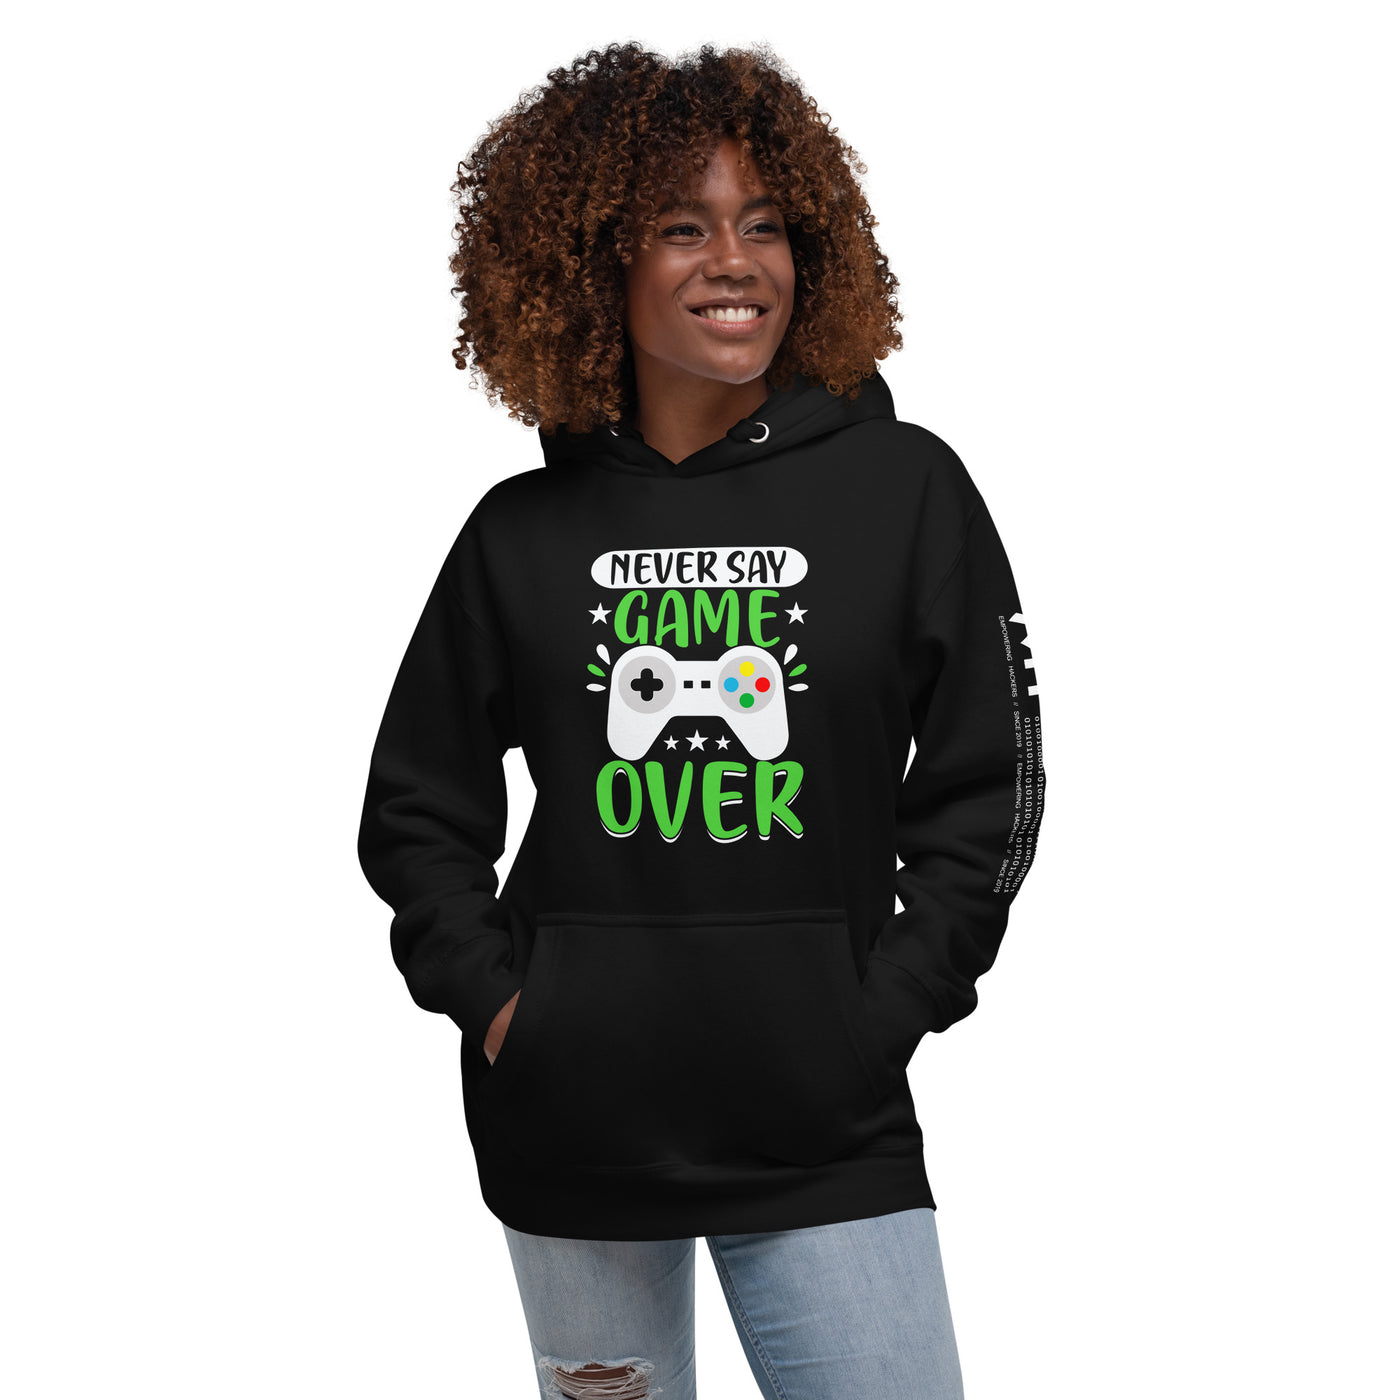 Never say Gameover Unisex Hoodie